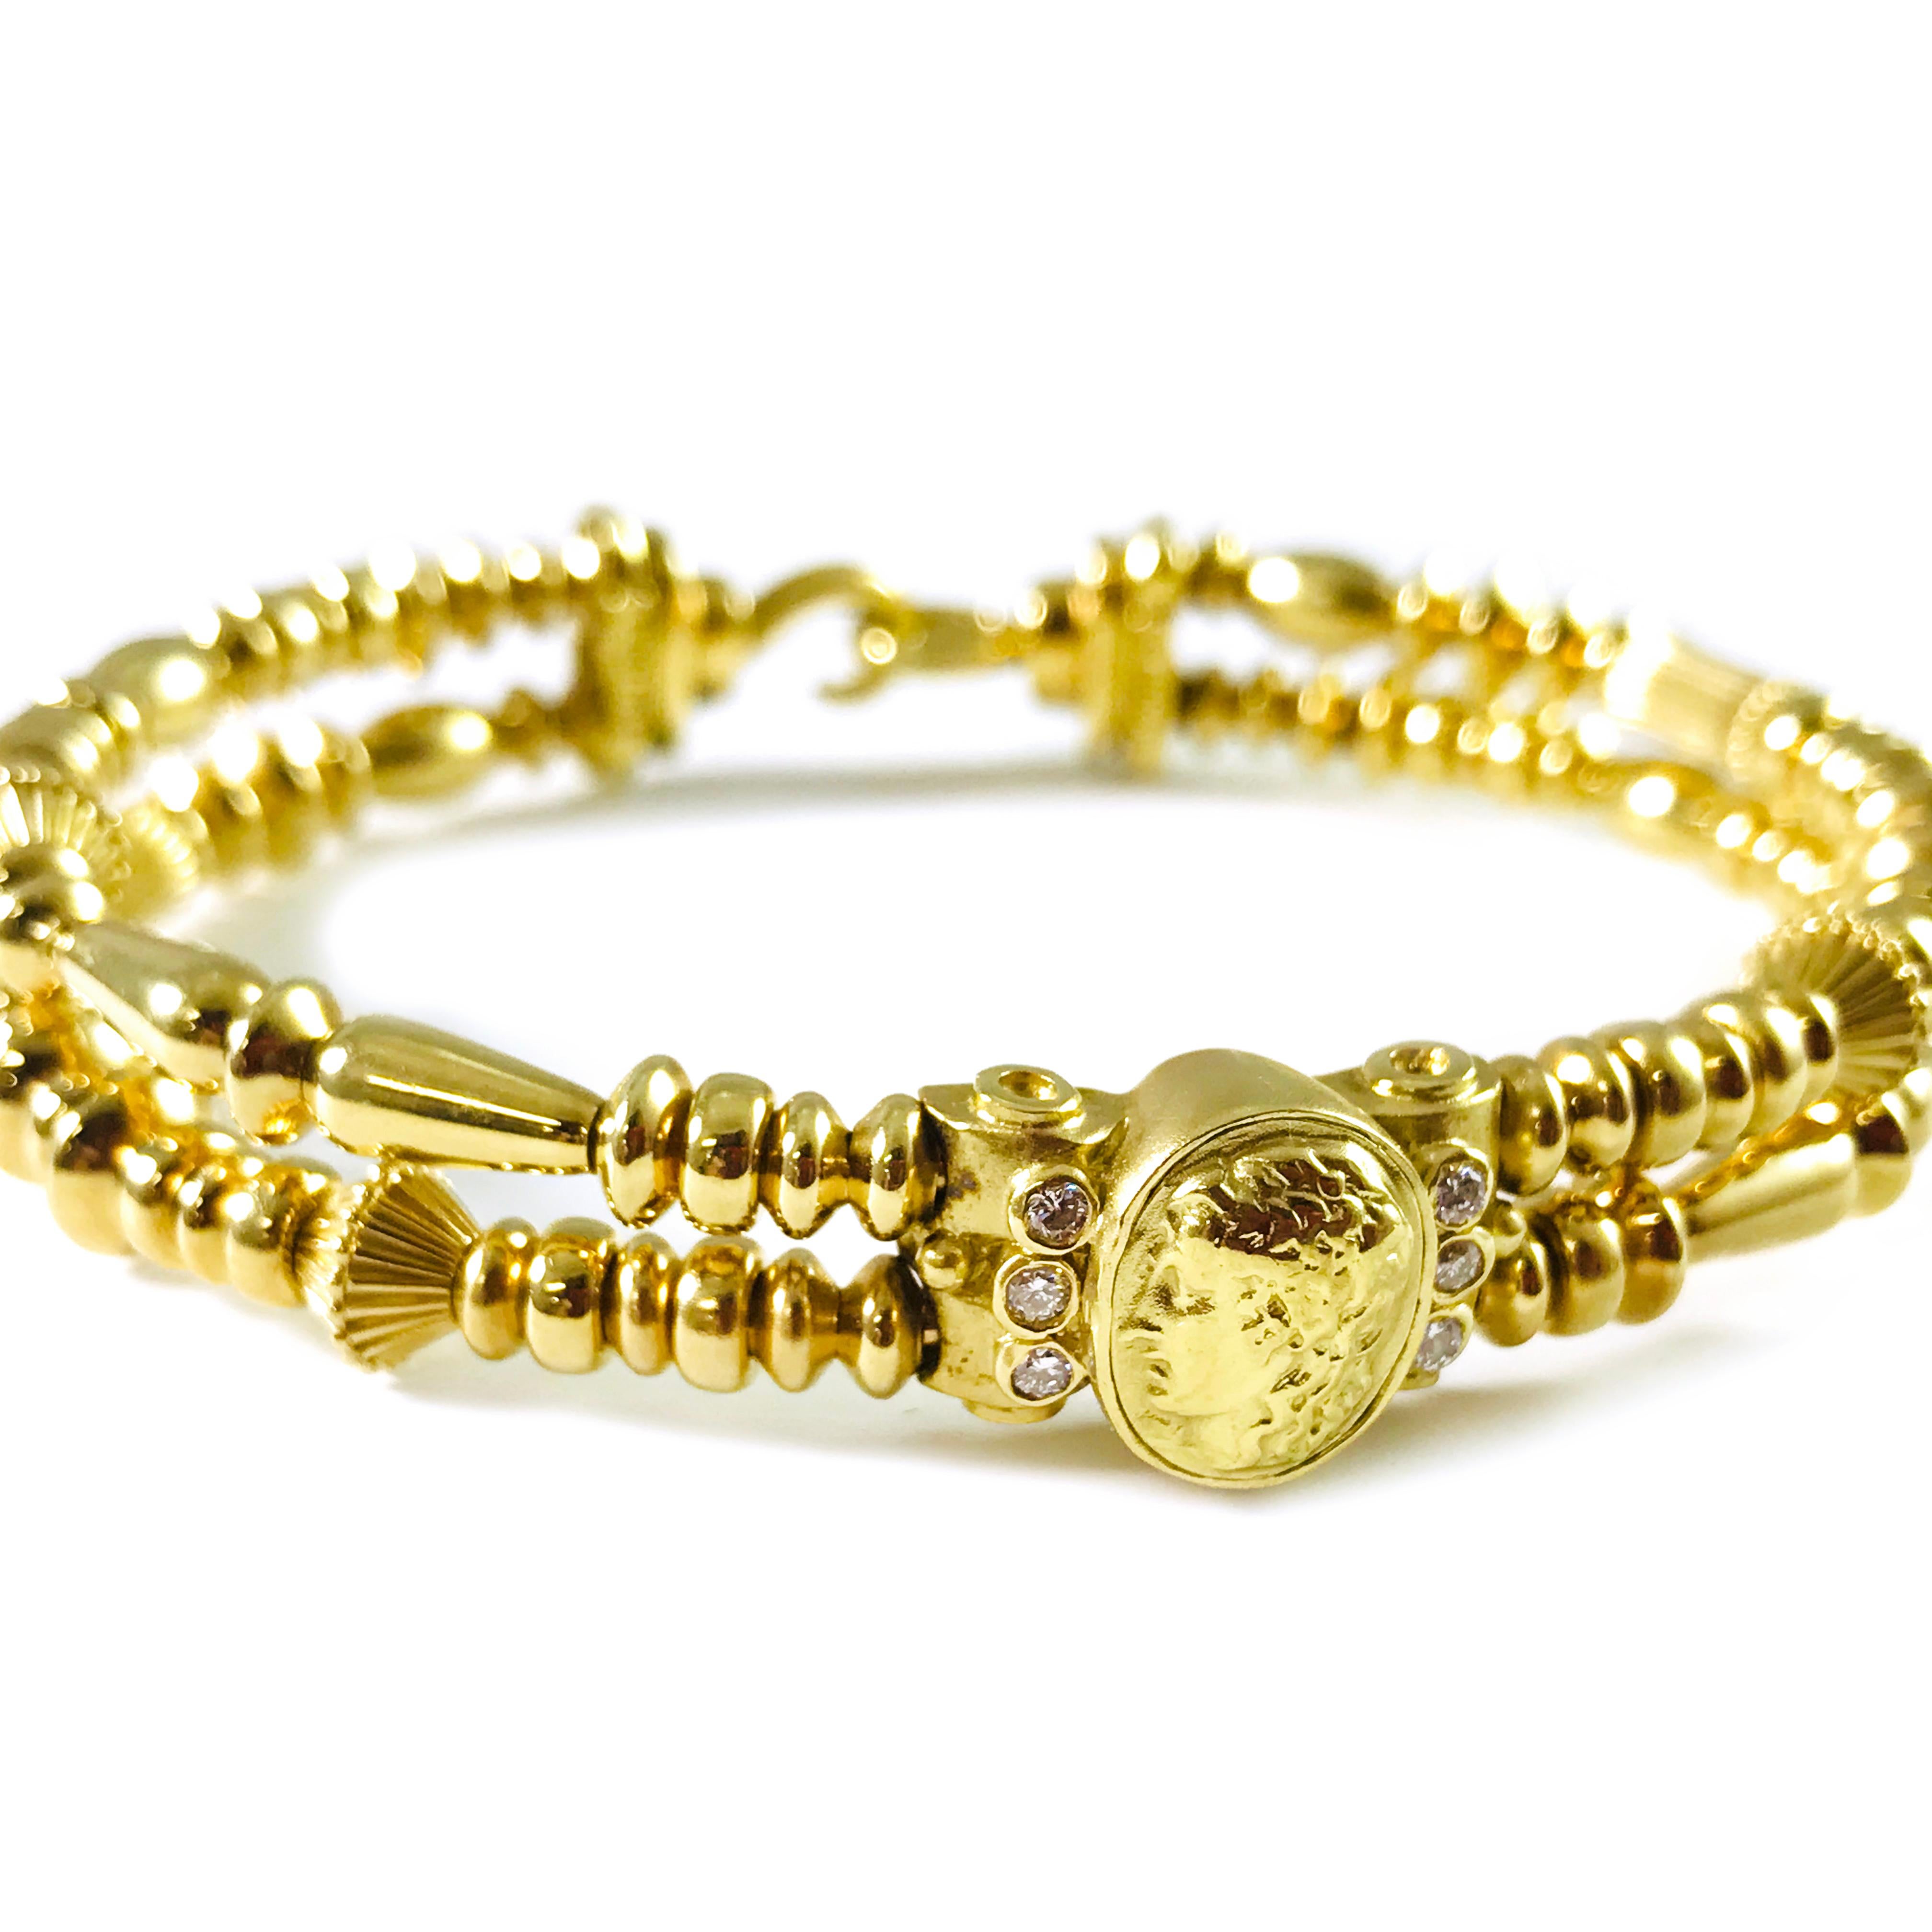 18 Karat Yellow Gold Seidengang Two Strand Bracelet. This lovely bracelet is designed as a double strand of beautiful multi-shaped beads. At the top of the bracelet is the head of Greek God Apollo with three bezel-set round 2mm diamonds along each